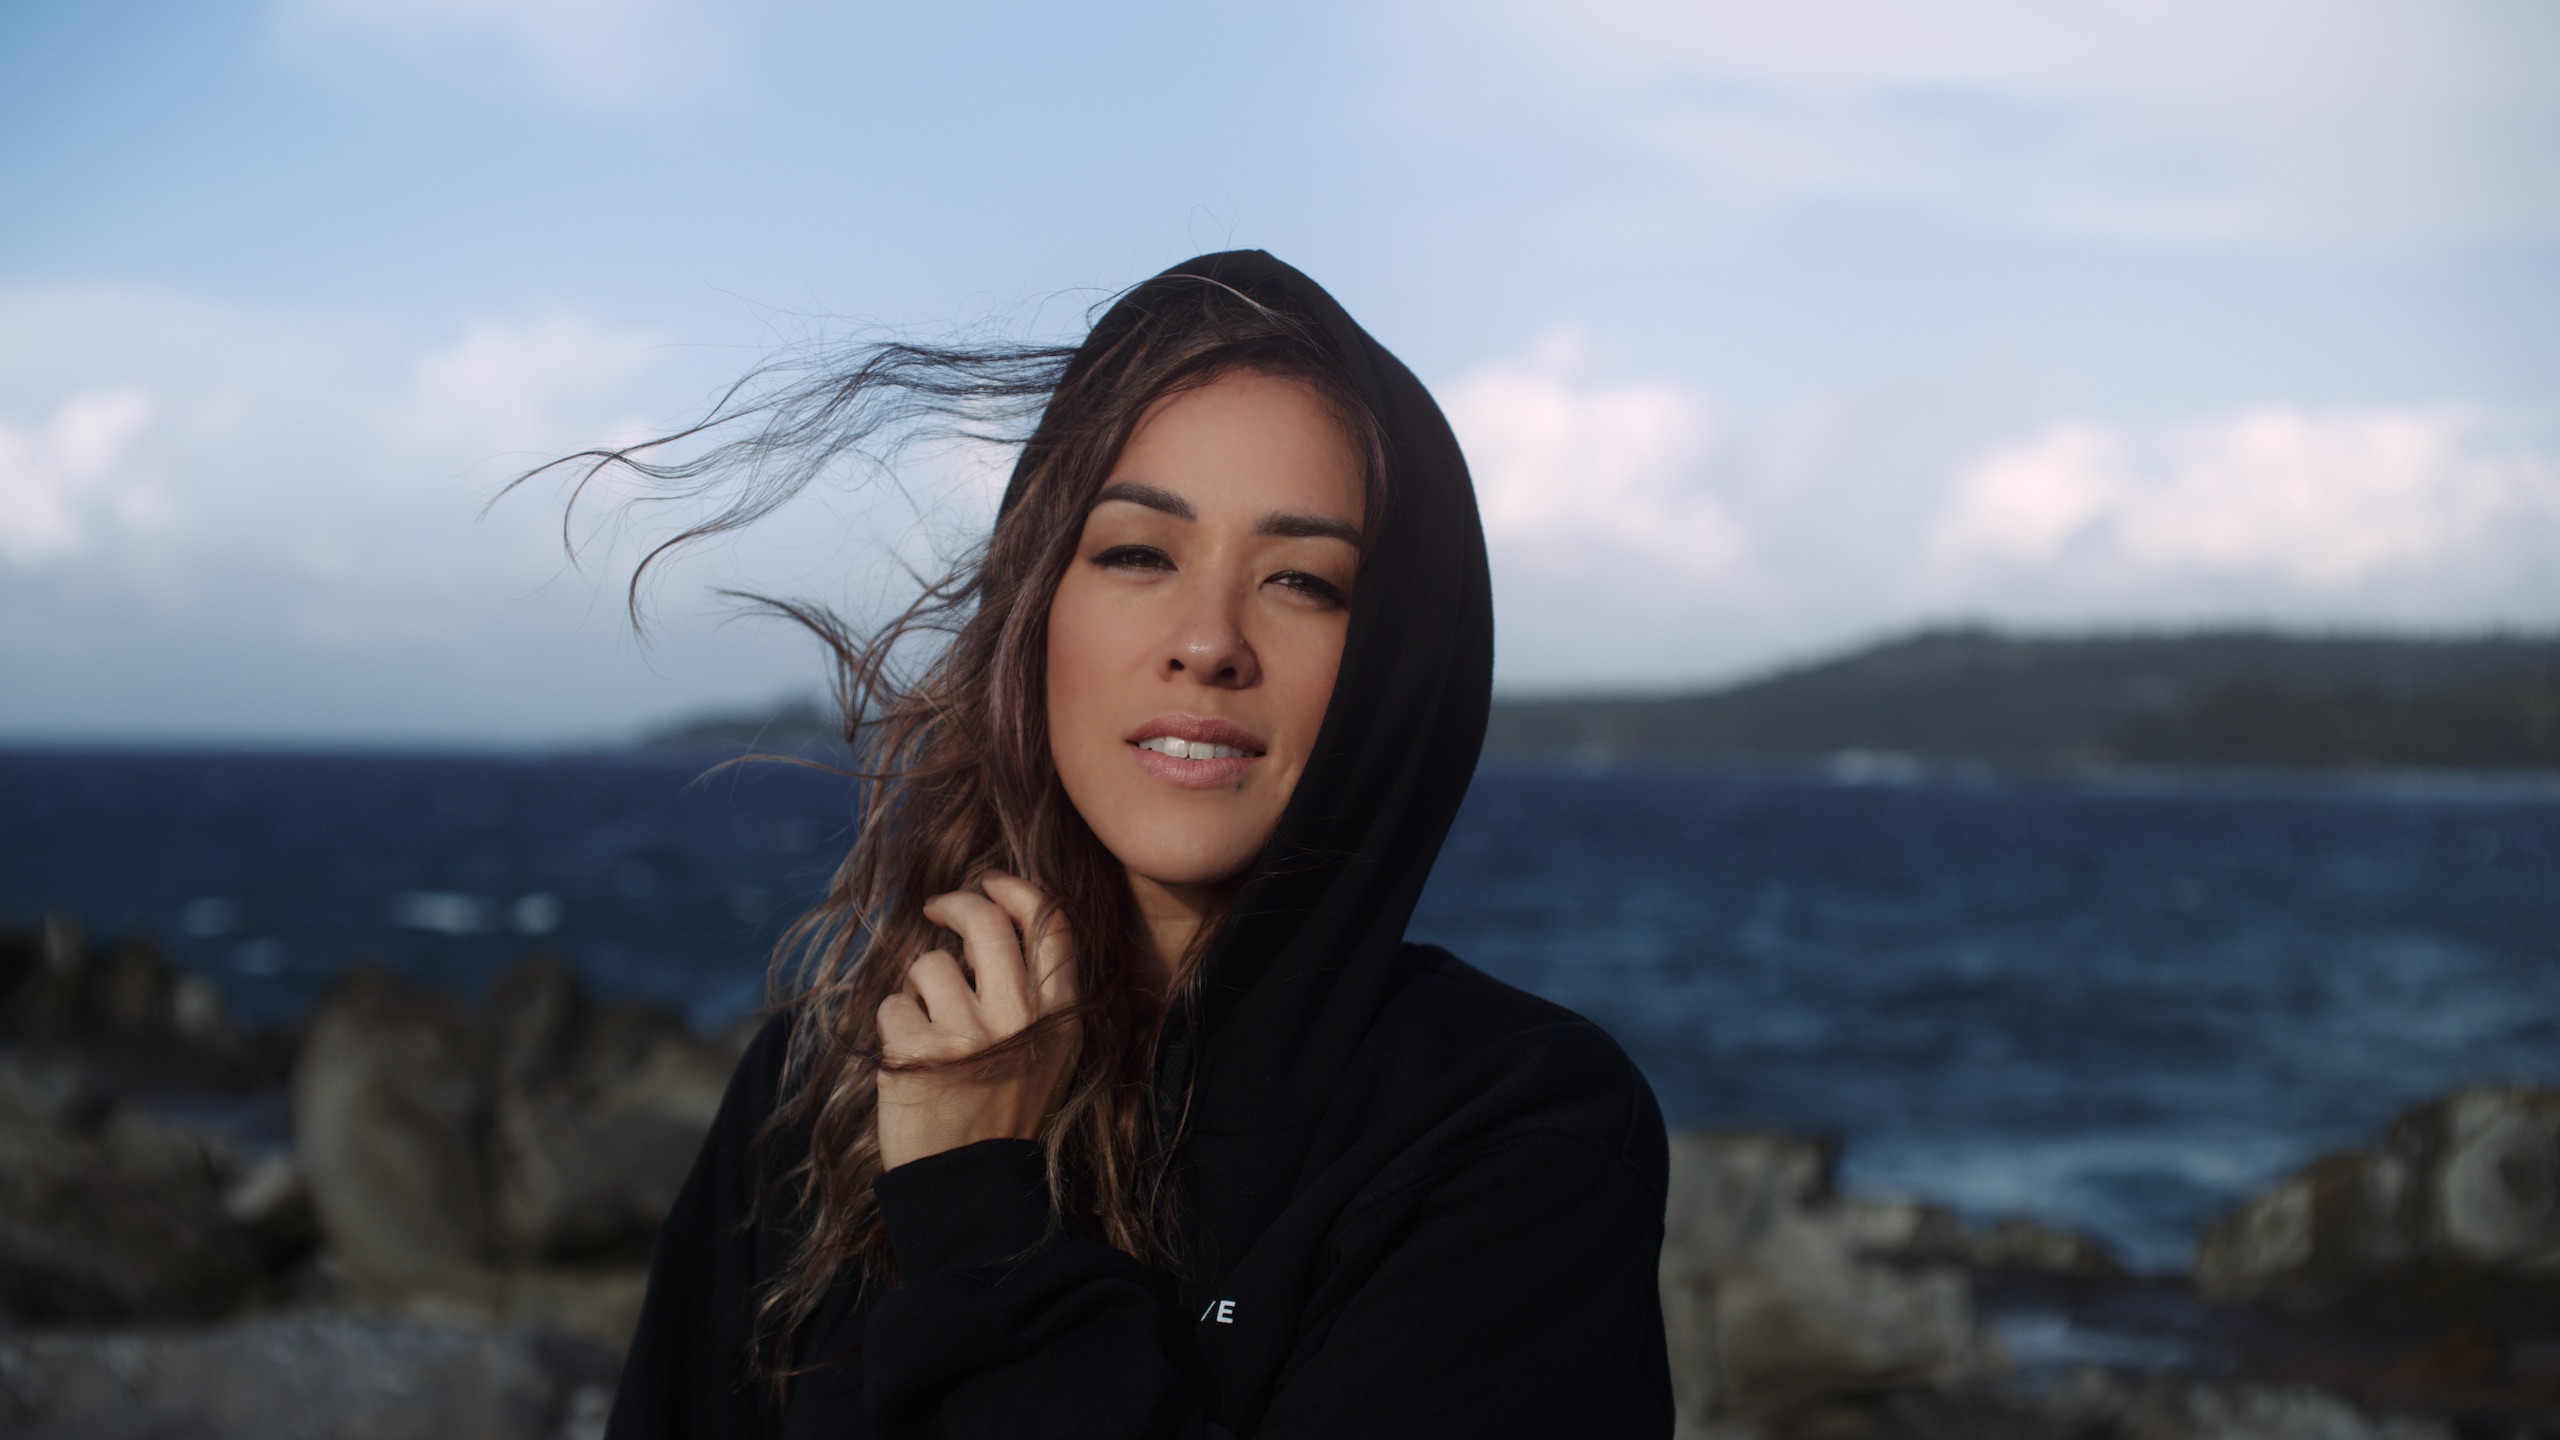 Uncreative Shop Hawaii Apparel on available at the Uncreative Shop Headshot of woman with long brown hair wearing black hoodie posing for the camera by a lake